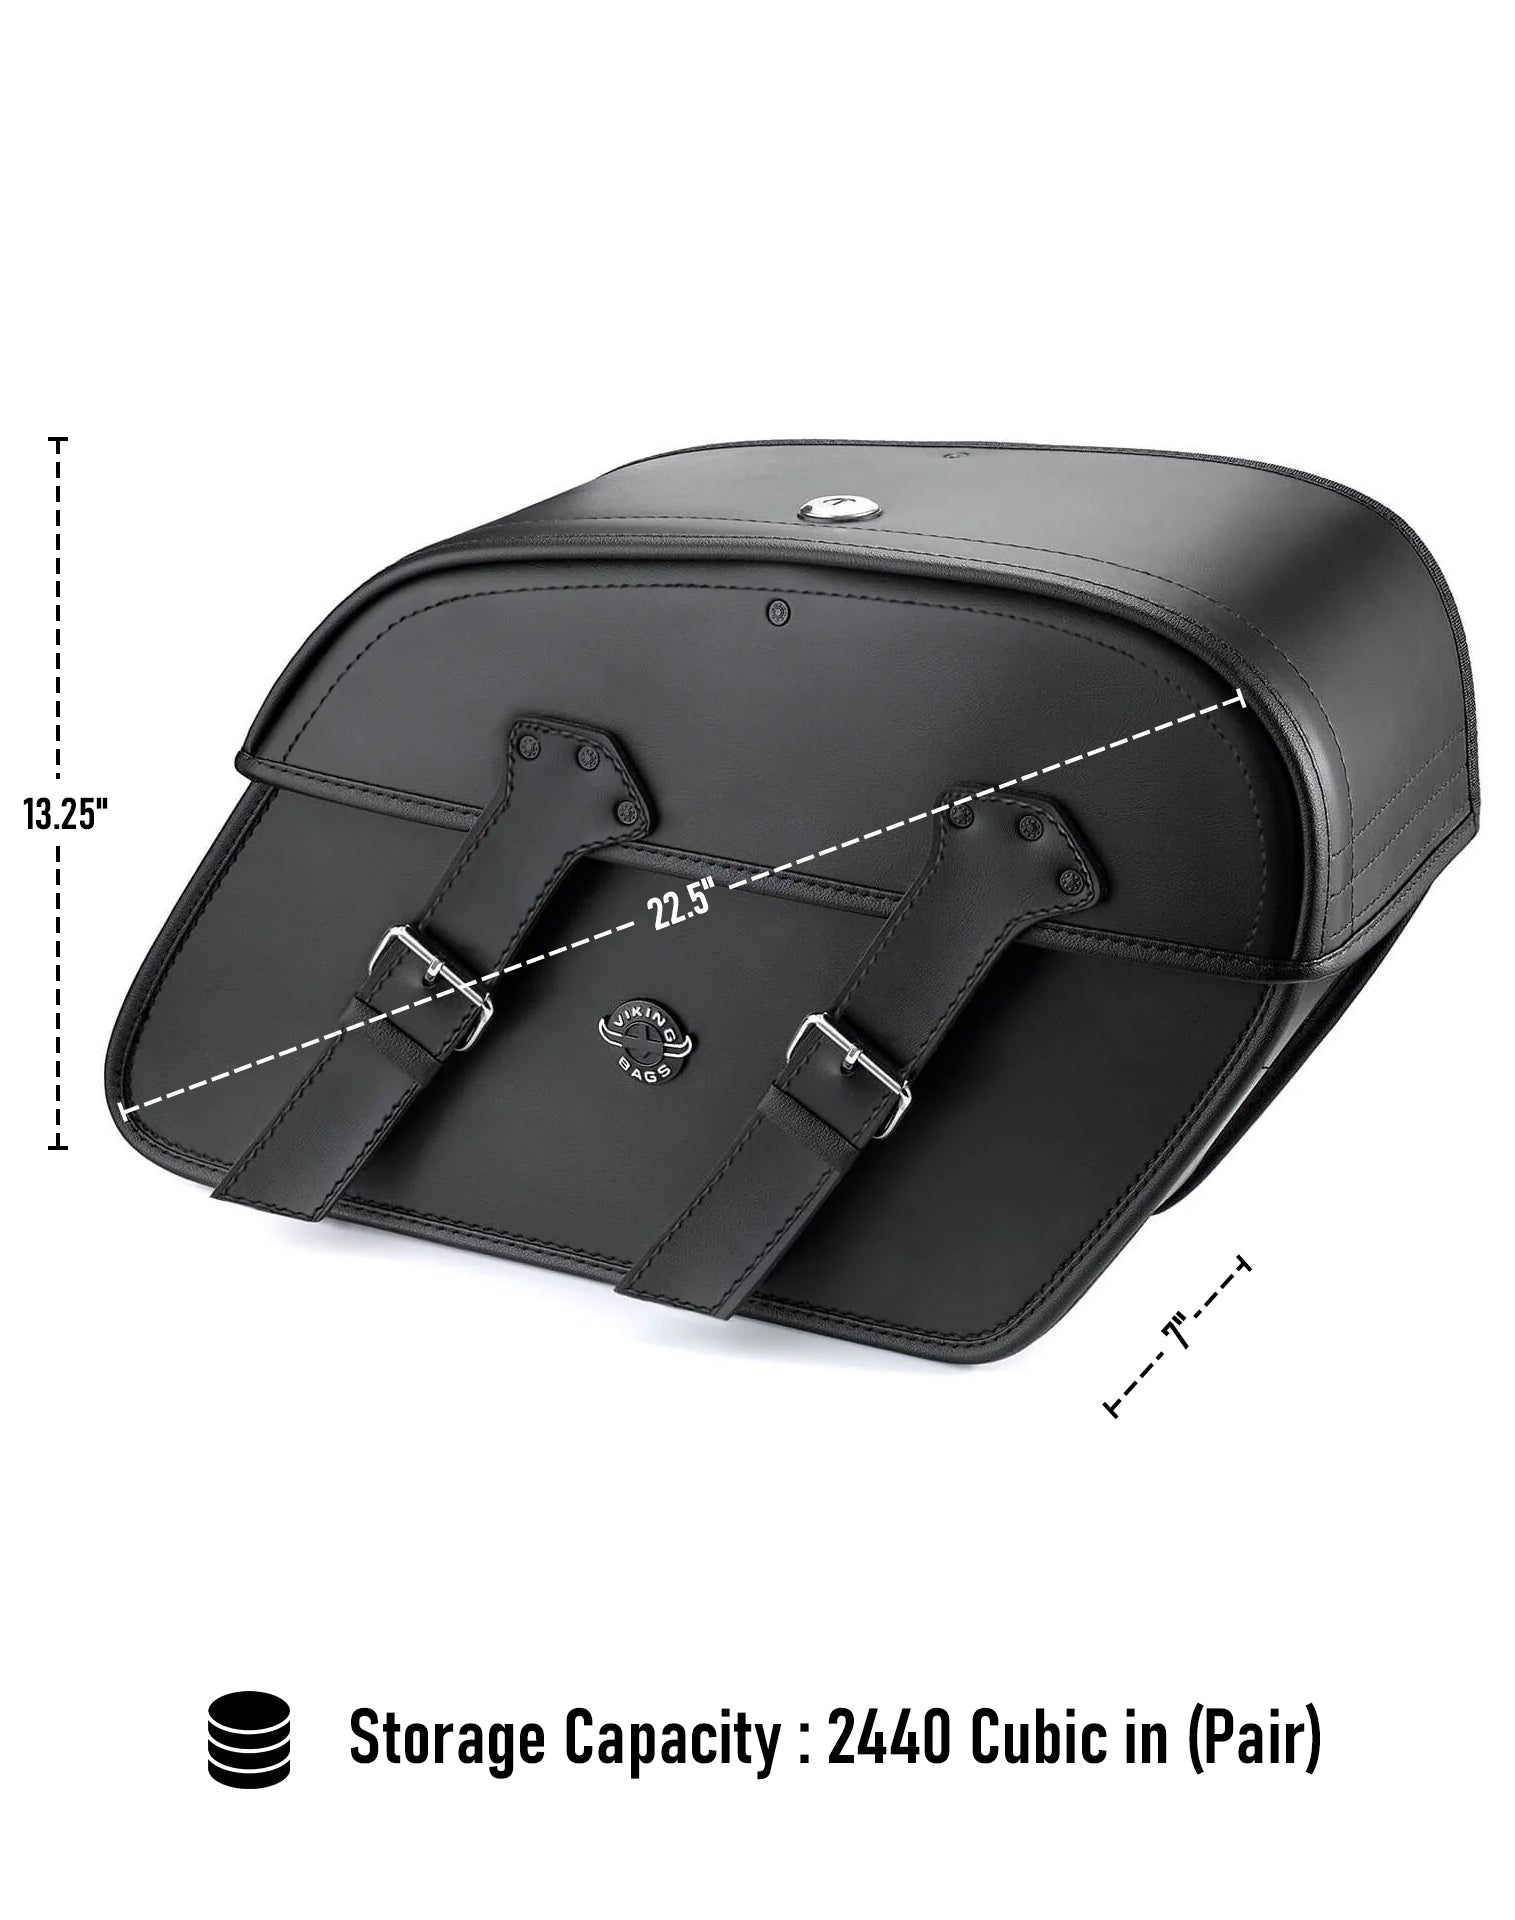 Viking Raven Extra Large Suzuki Boulevard M50 Vz800 Leather Motorcycle Saddlebags Can Store Your Ridings Gears